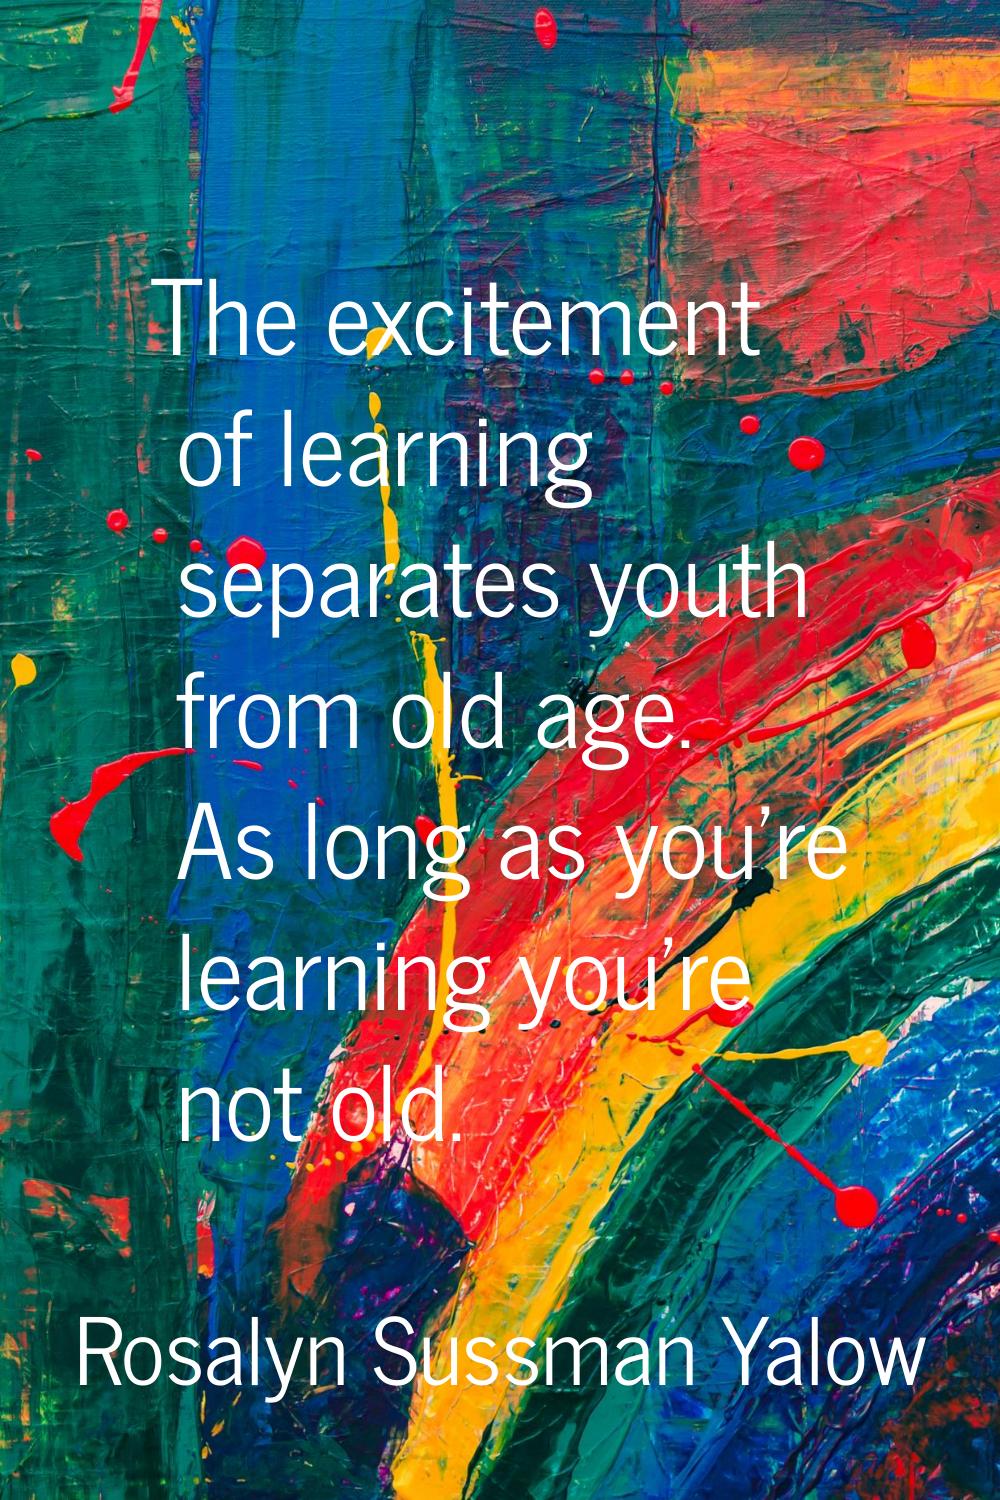 The excitement of learning separates youth from old age. As long as you're learning you're not old.